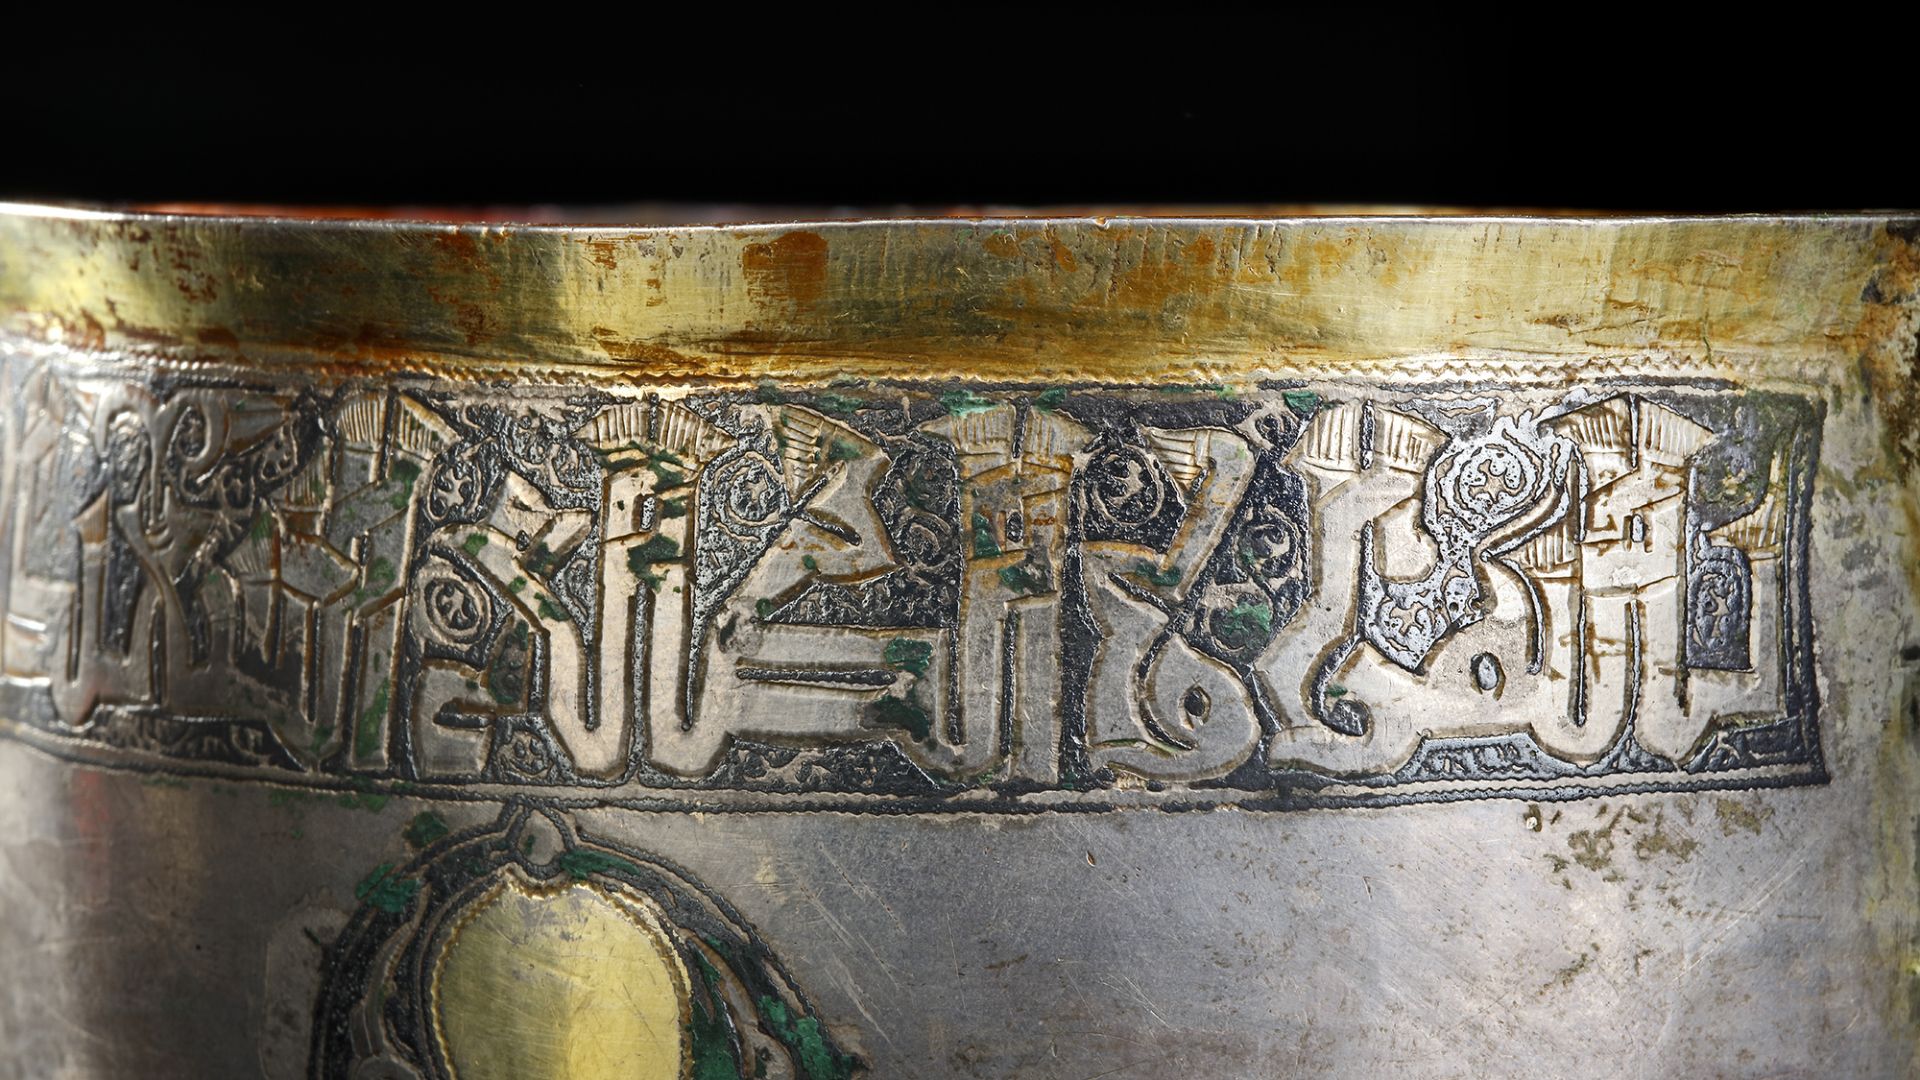 A RARE SILVER AND NIELLOED CUP WITH KUFIC INSCRIPTION, PERSIA OR CENTRAL ASIA, 11TH-12TH CENTURY - Image 24 of 34